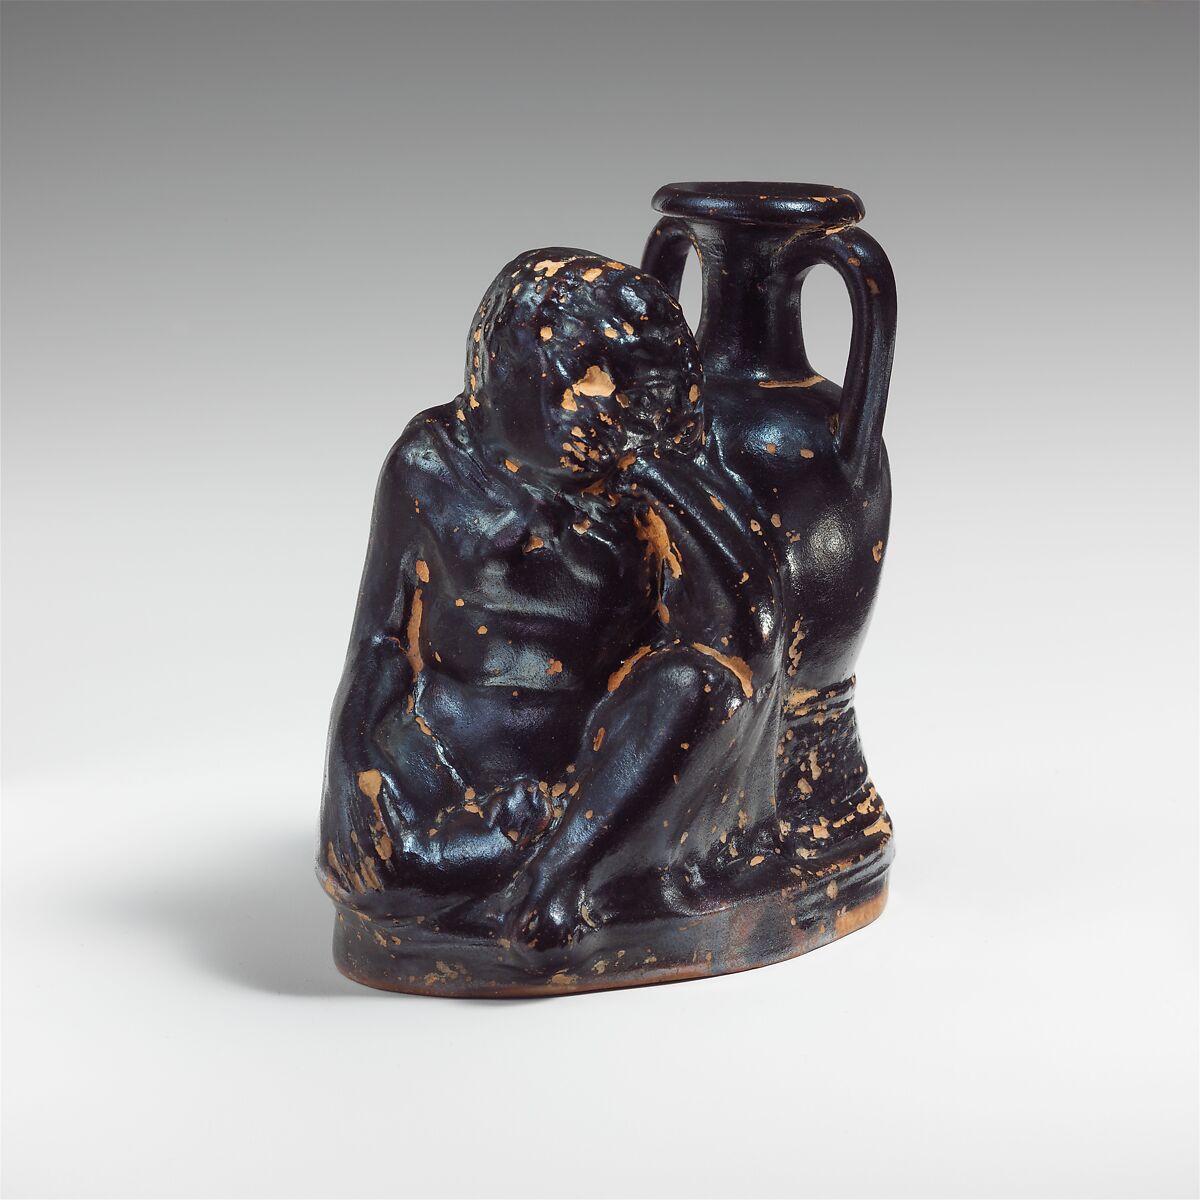 Terracotta askos (flask with a spout and handle), Terracotta, Greek, South Italian, Campanian 